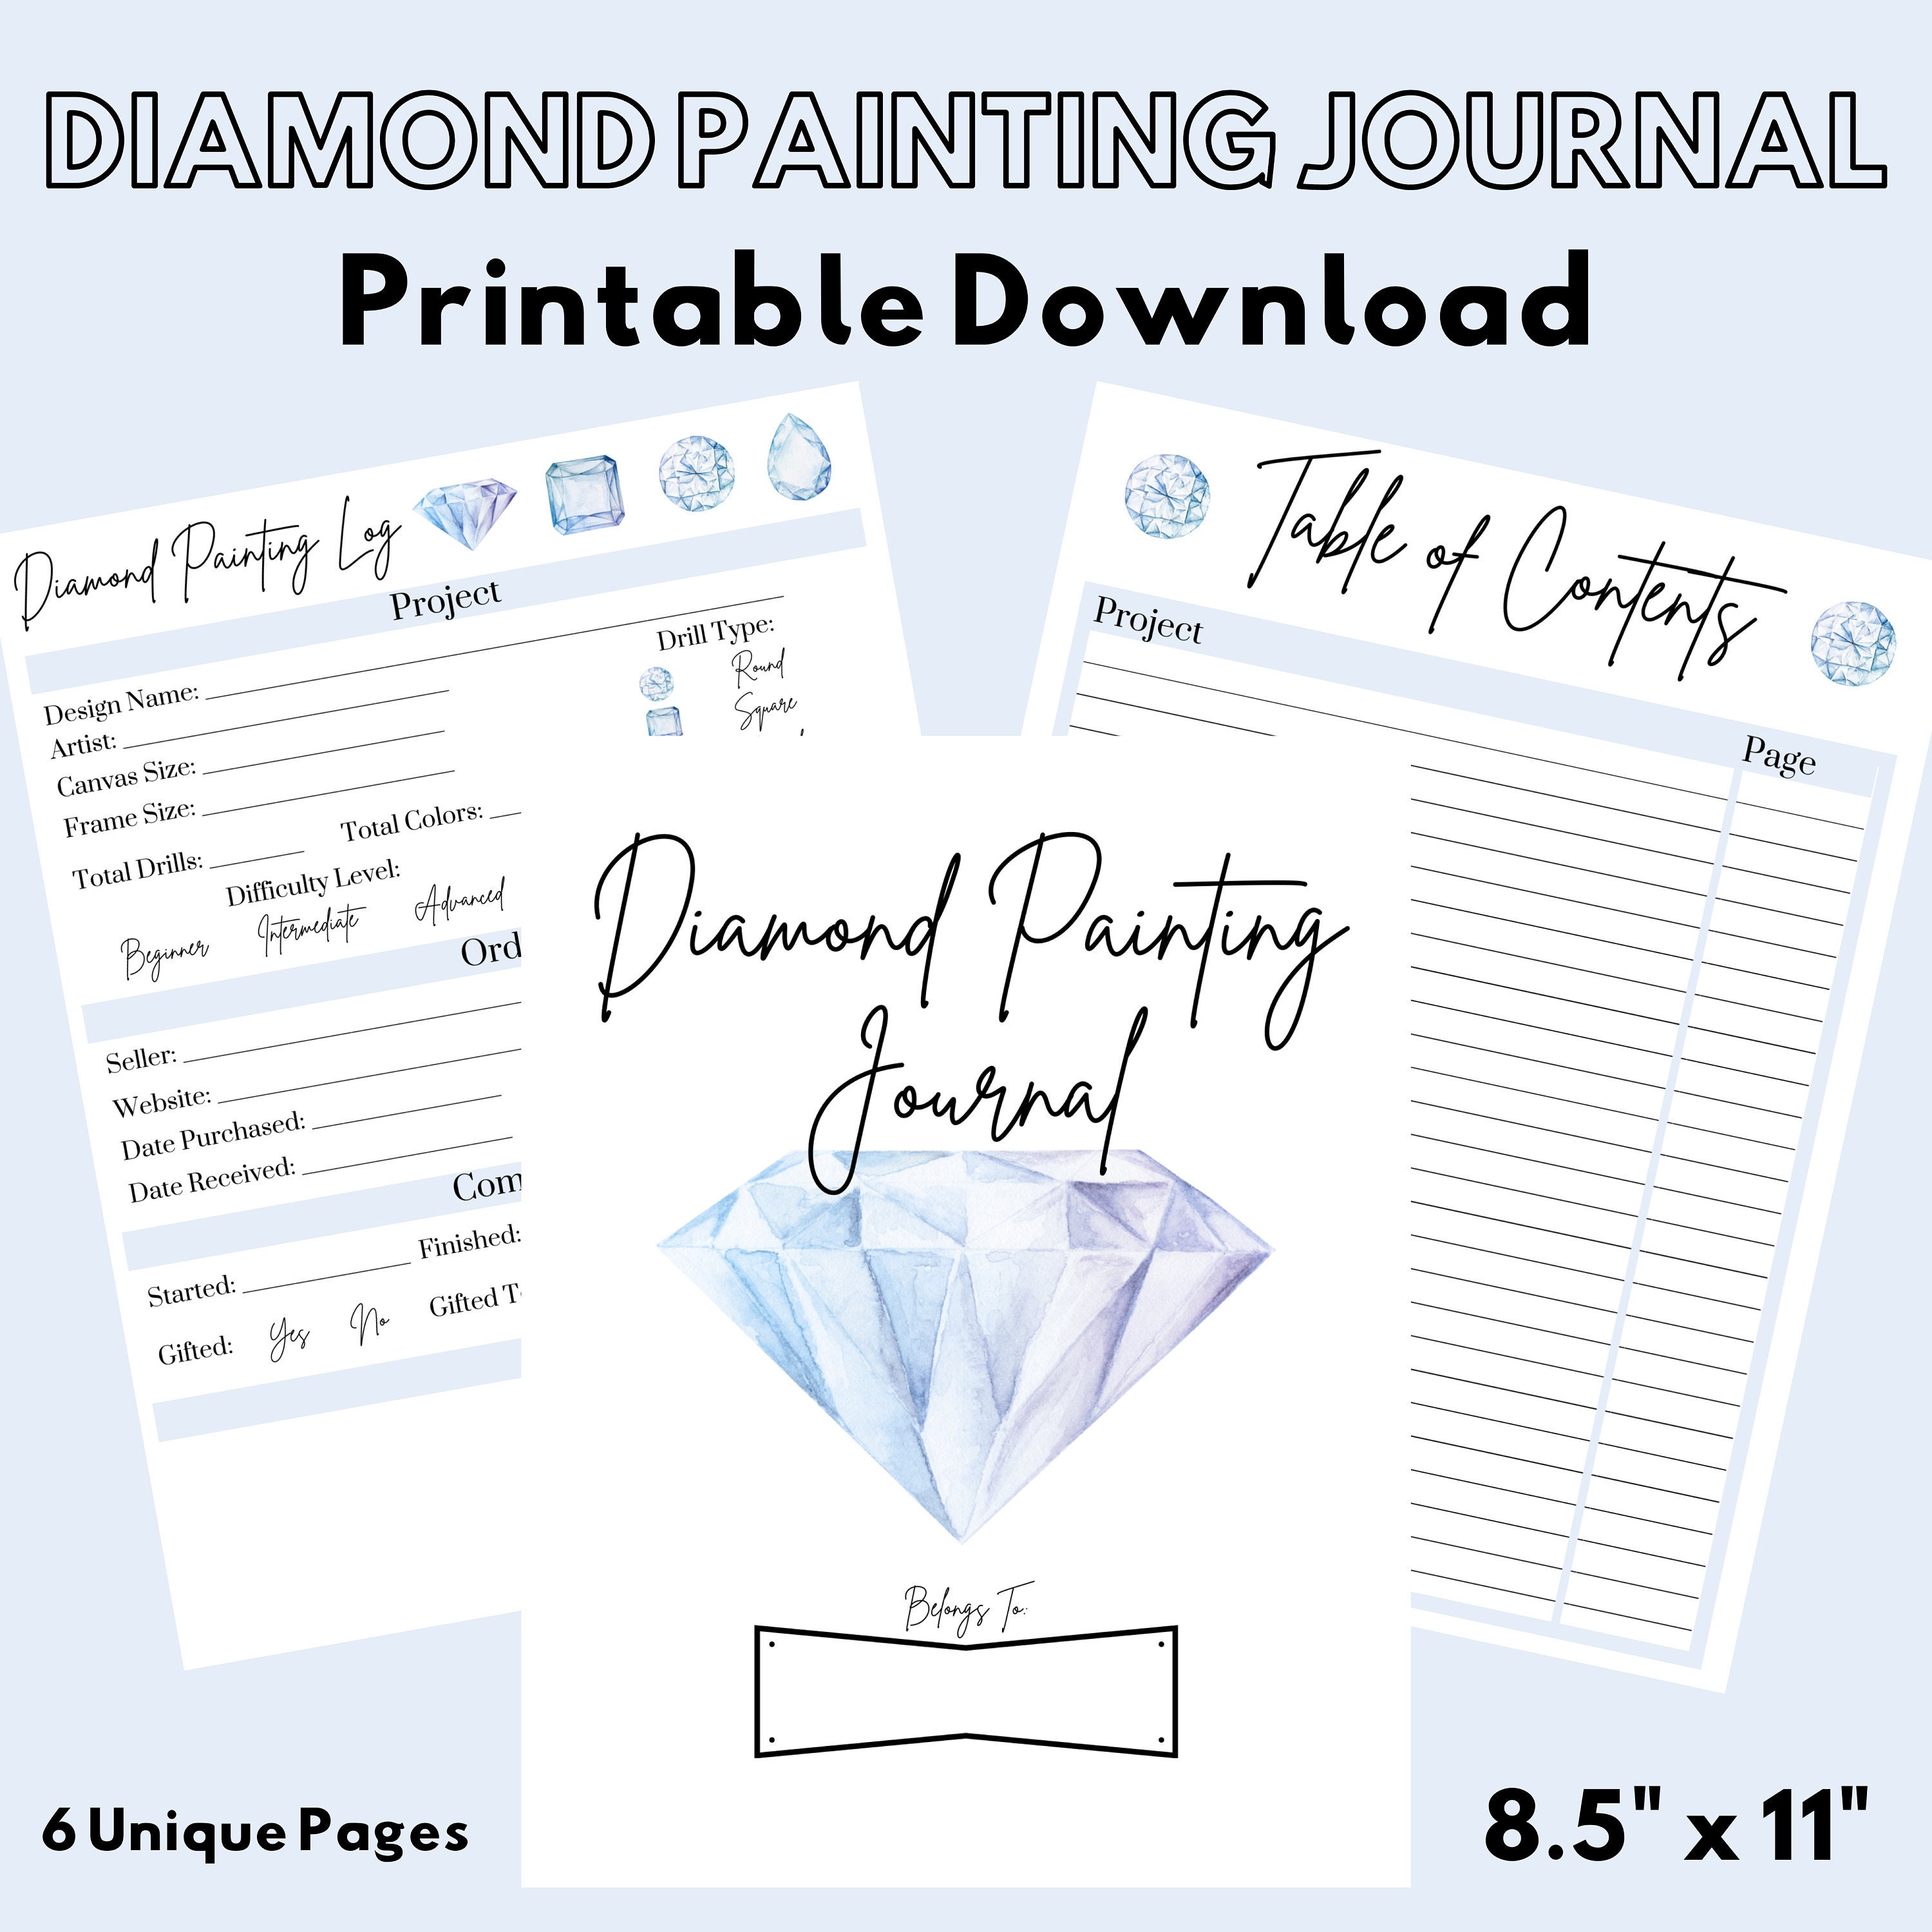 I'd rather be diamond painting: Log book, This guided prompt Journal is a  great gift for any Diamond painting lover. A useful notebook organizer to  track all of your art projects by